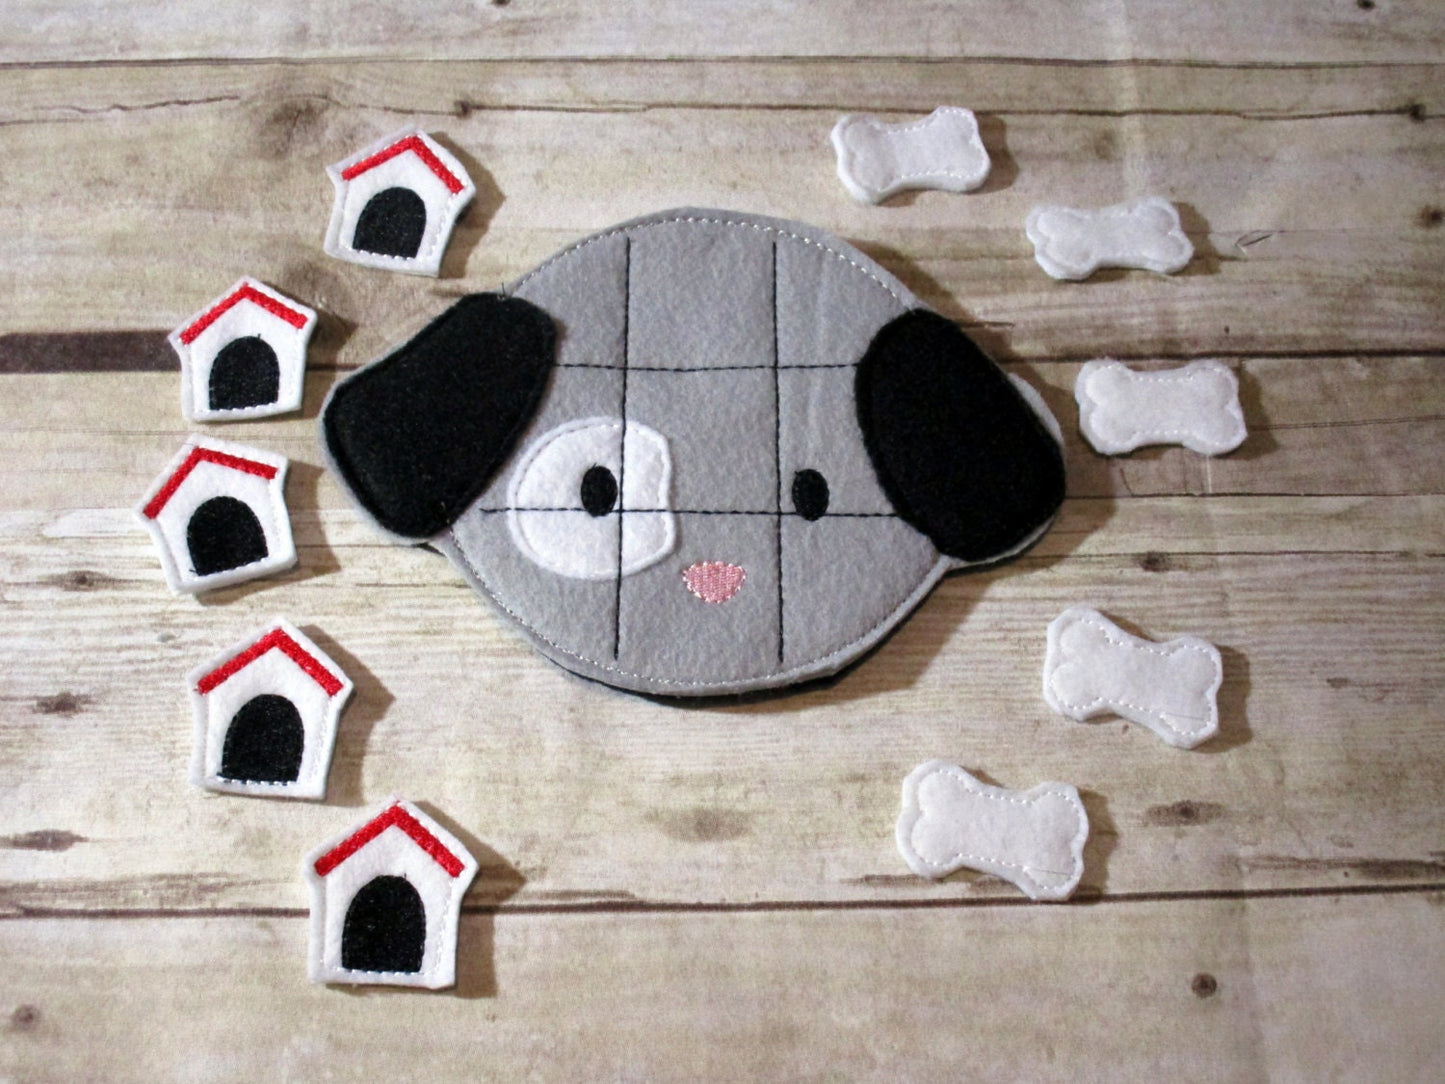 Cute handcrafted puppy tic tac toe game for boys and girls. Can be used as a gift or party favor.